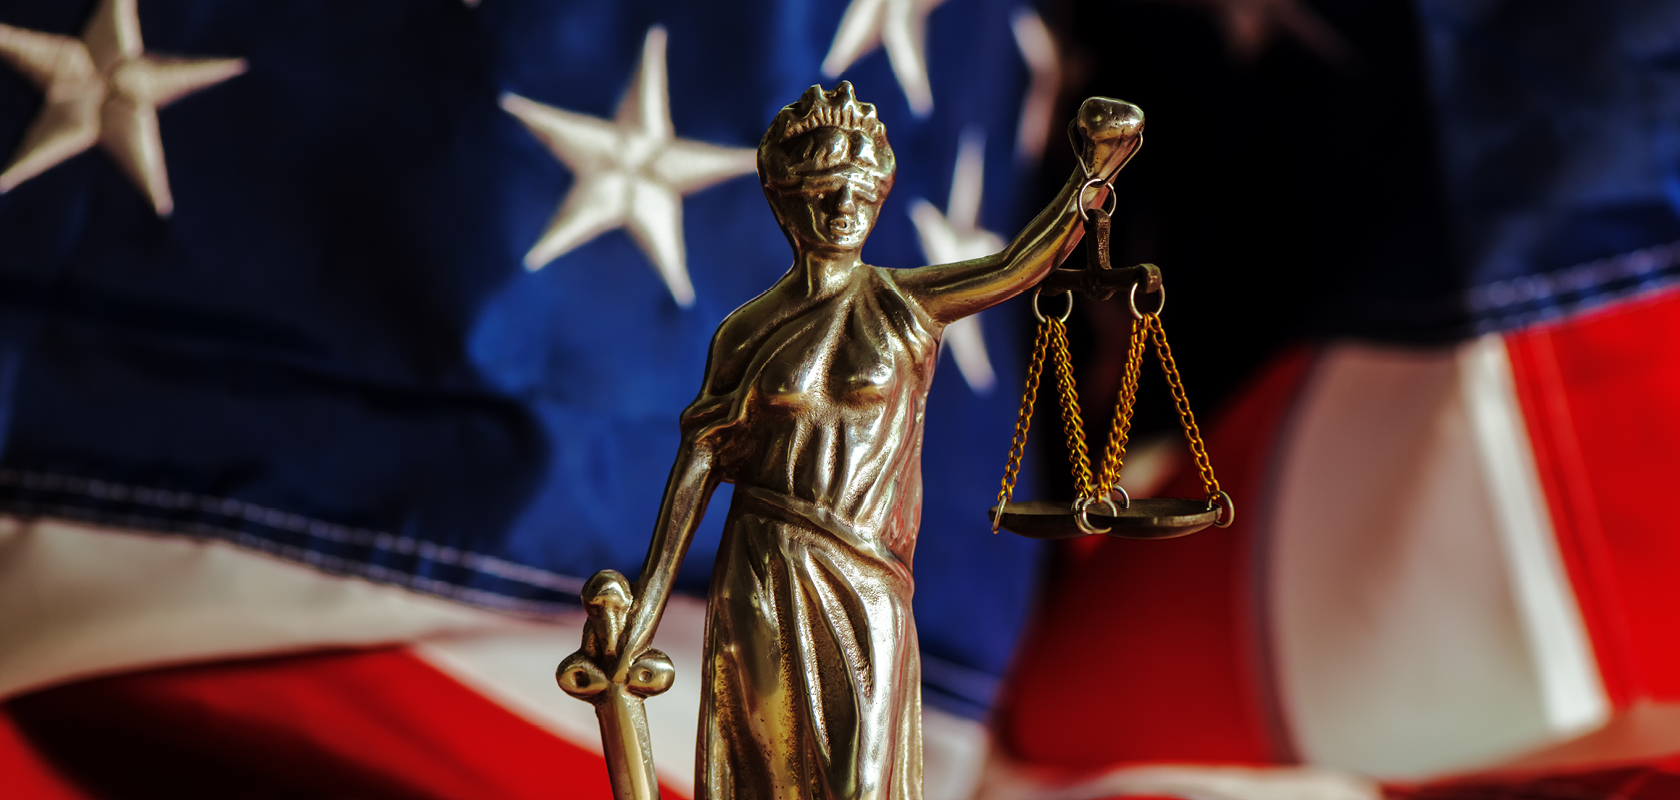 Scales of justice statuette in from of American flag